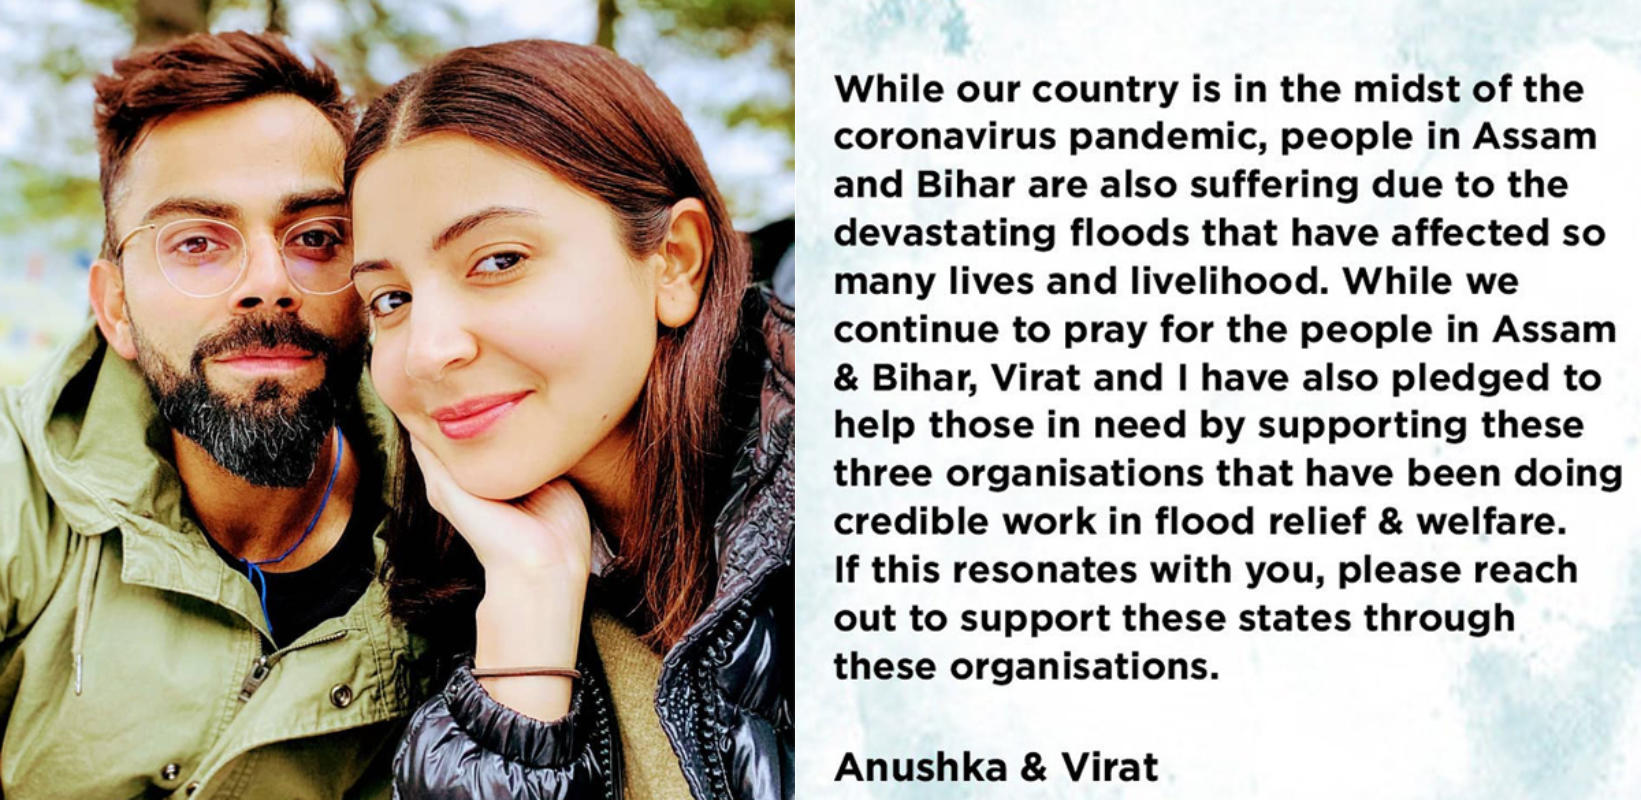 Anushka Sharma and Virat Kohli come out in support of people affected by floods in Assam & Bihar